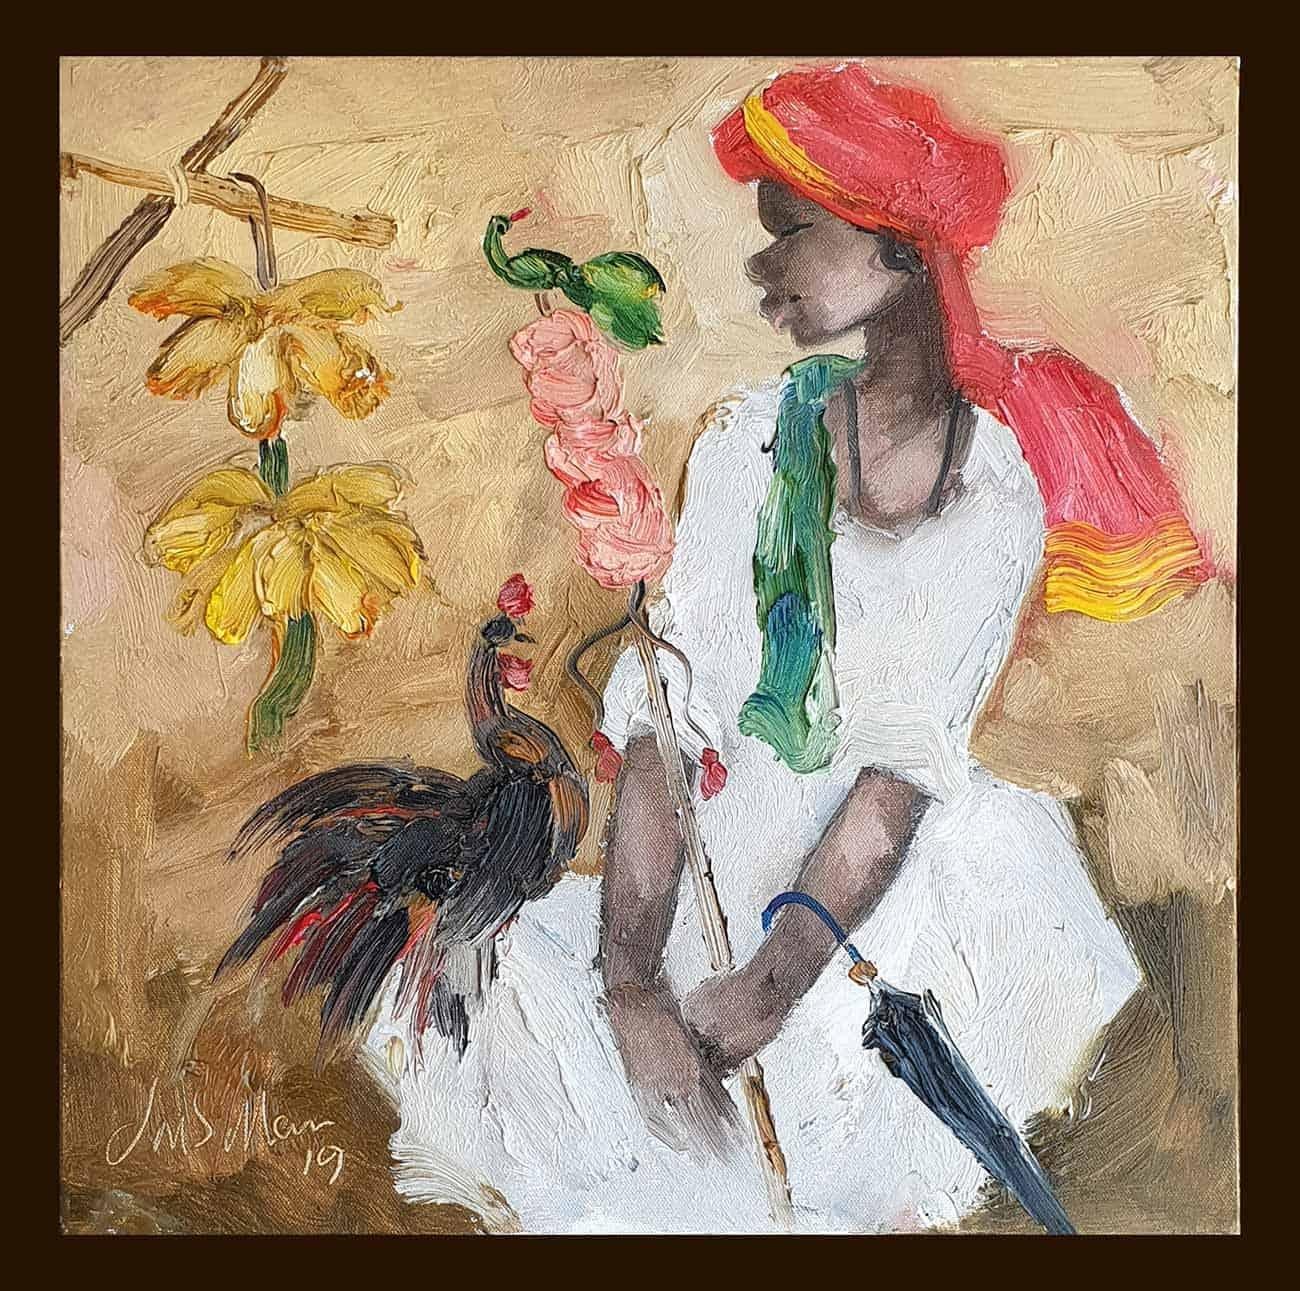 JMS Mani Portrait Painting - Badami People, Oil on Canvas, White, Red by Contemporary Artist "In Stock"